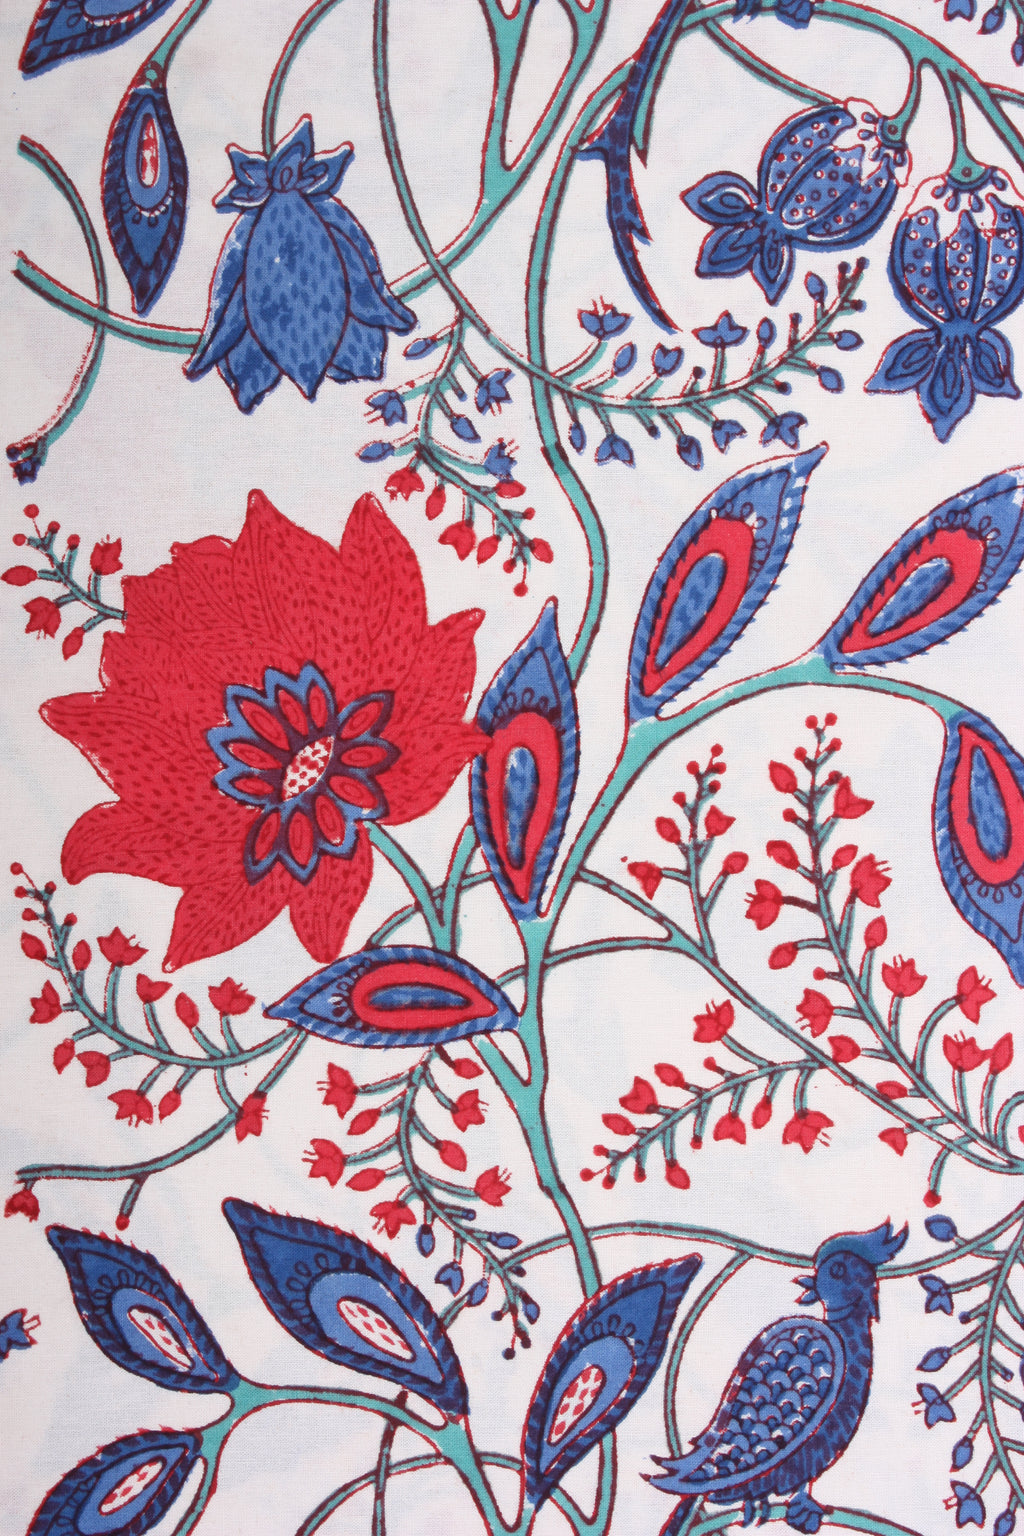 Red Clematis Handcrafted Tablecloth